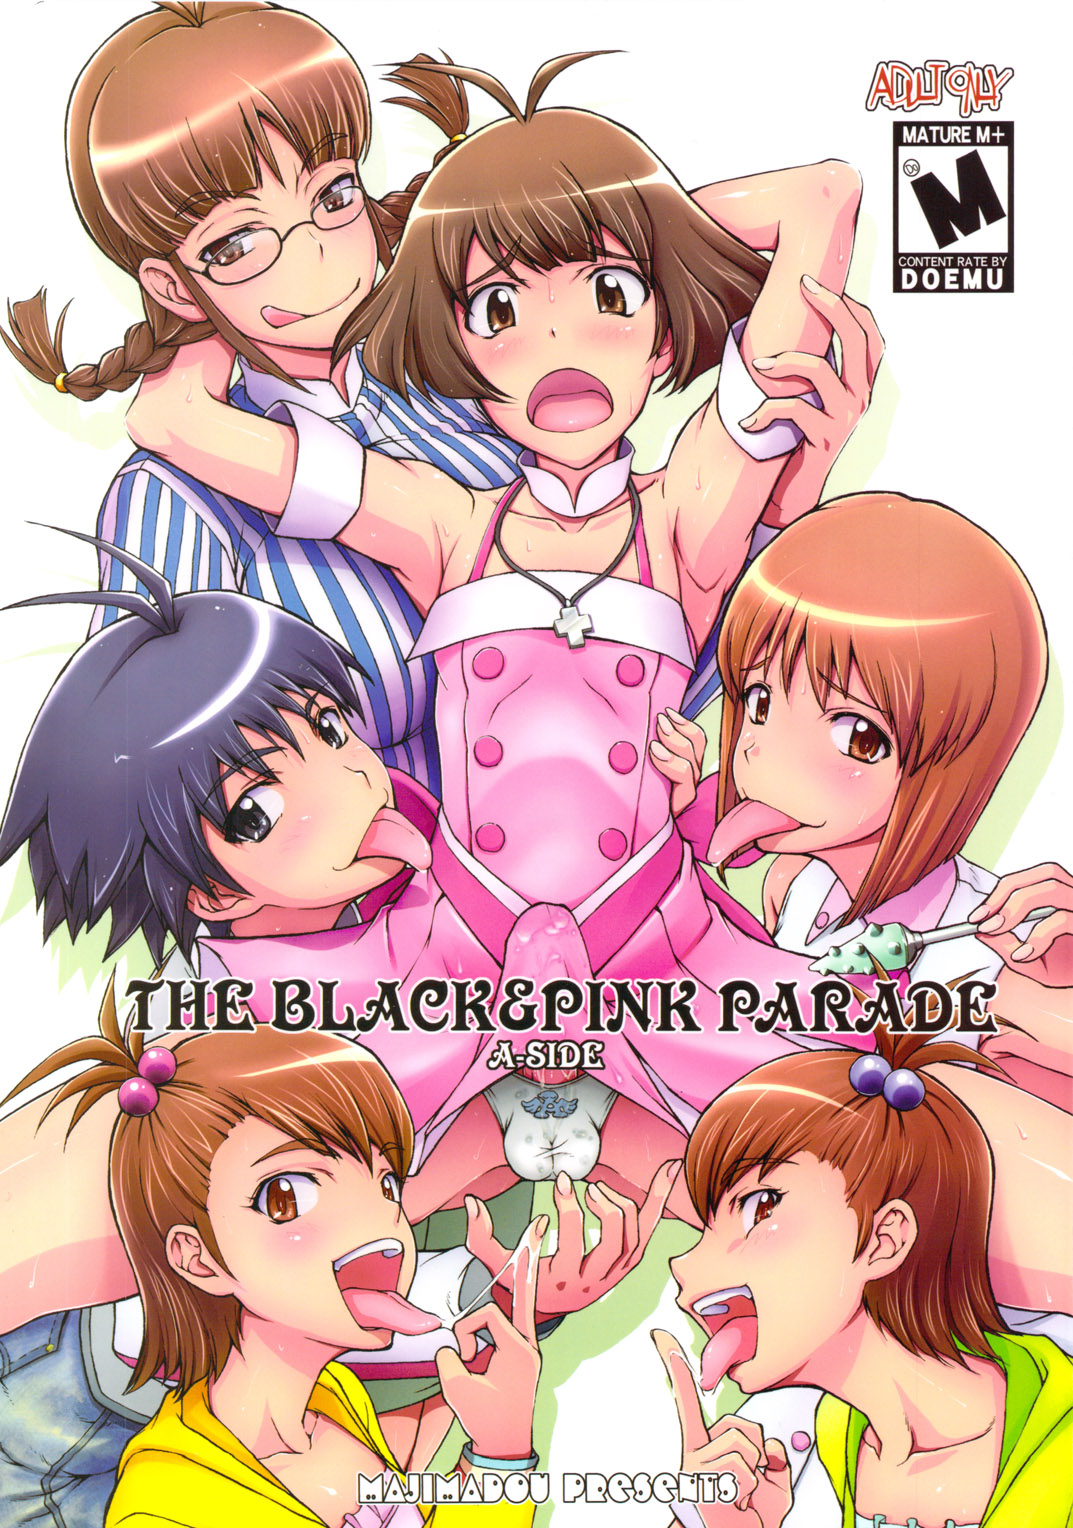 (C78) [Majimadou (Matou)] THE BLACK &amp; PINK PARADE A-SIDE (THE IDOLM@STER) (C78) (同人誌) [眞嶋堂 (まとう)] THE BLACK &amp; PINK PARADE A-SIDE (アイドルマスター)